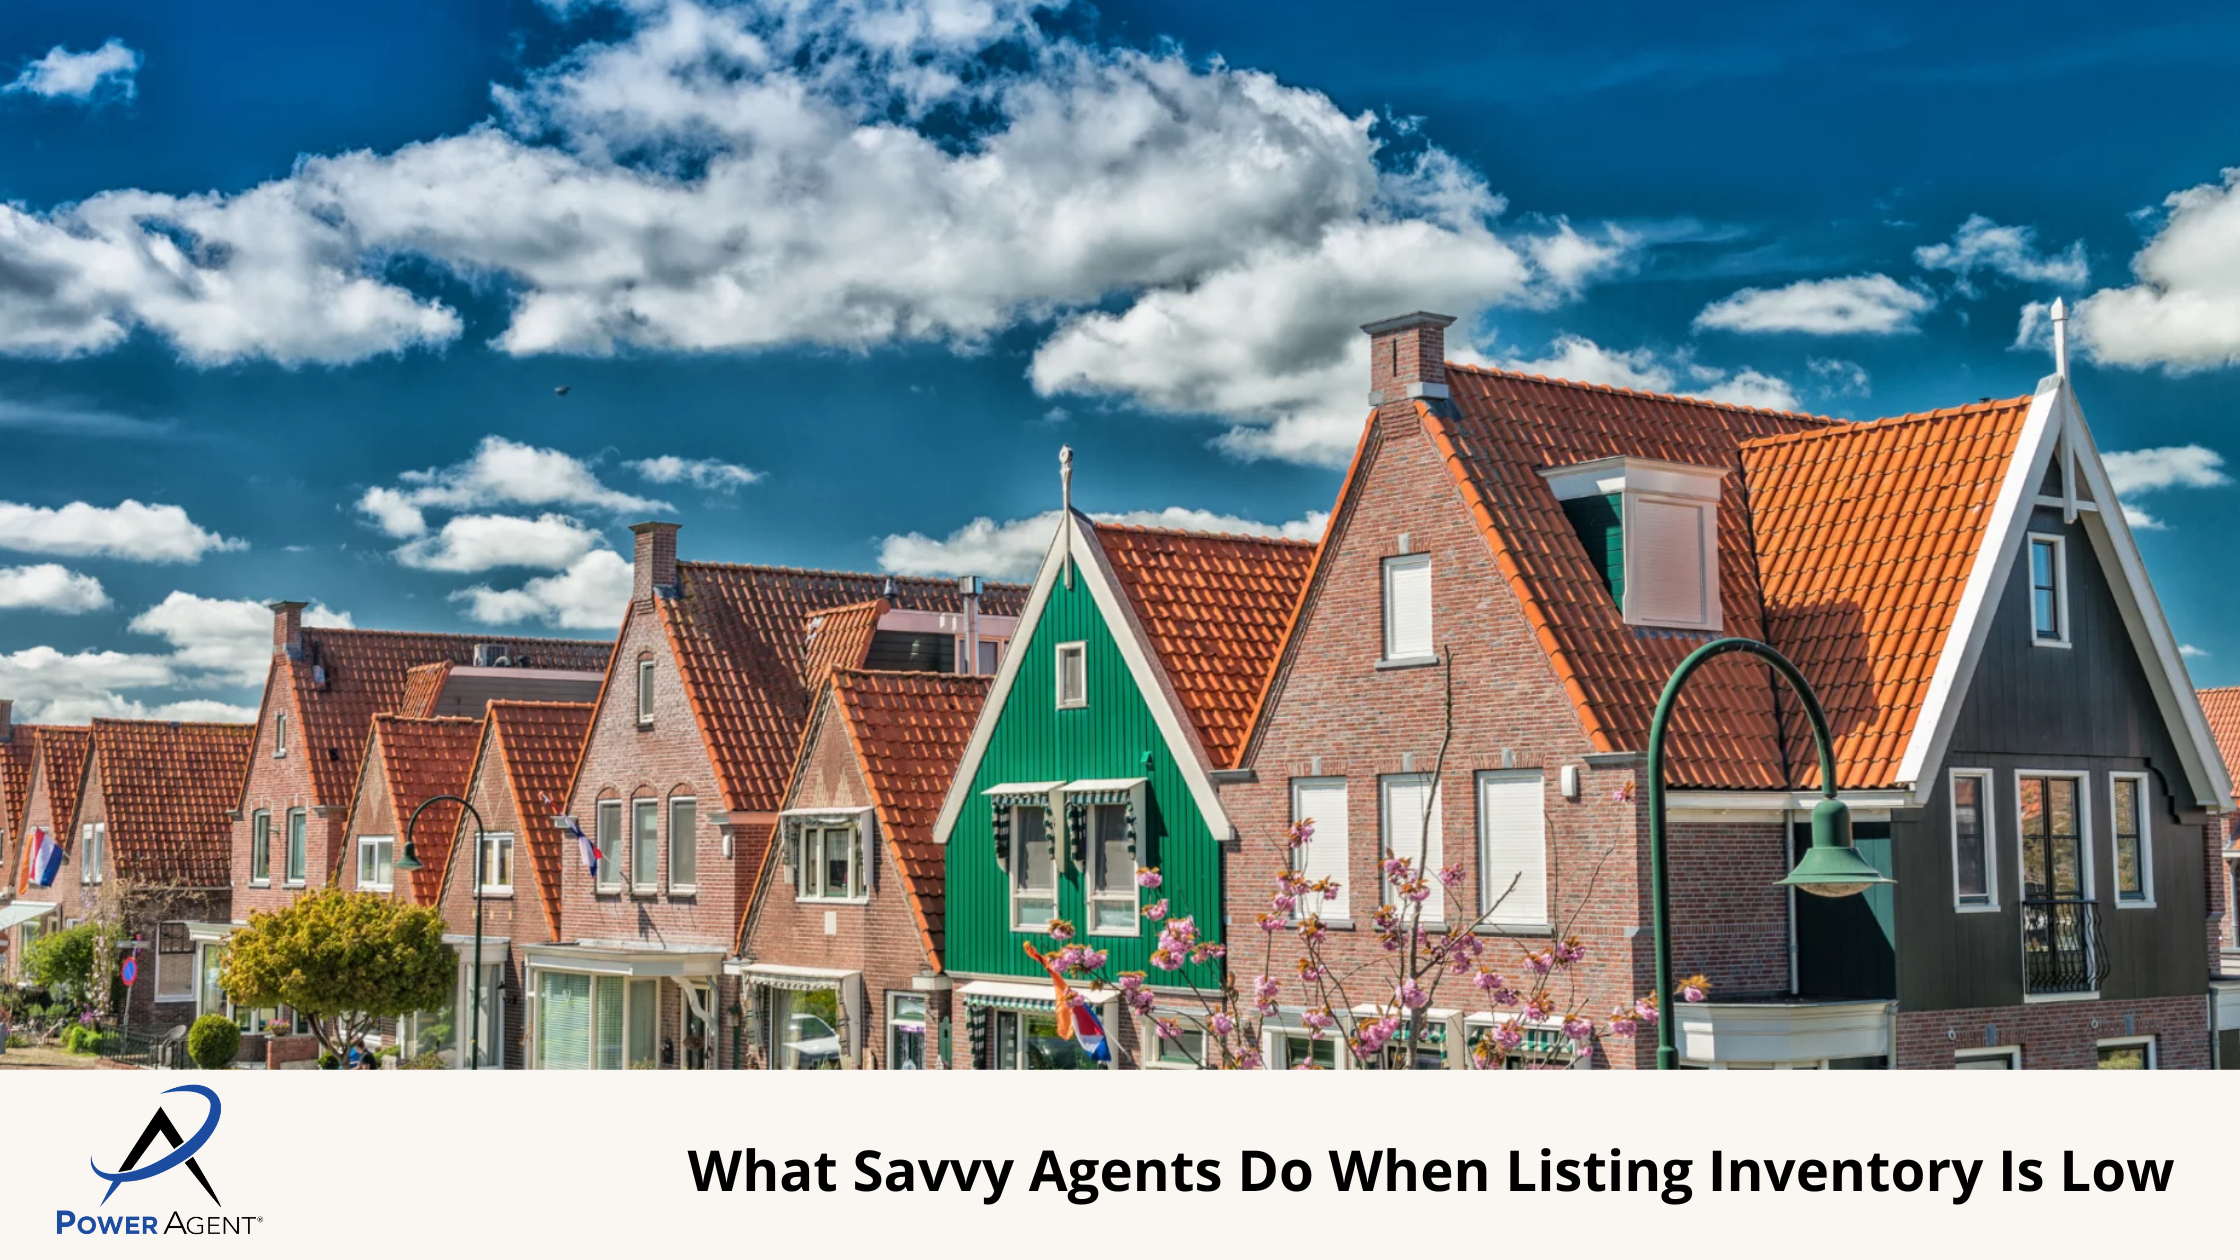 What Savvy Agents Do When Listing Inventory Is Low